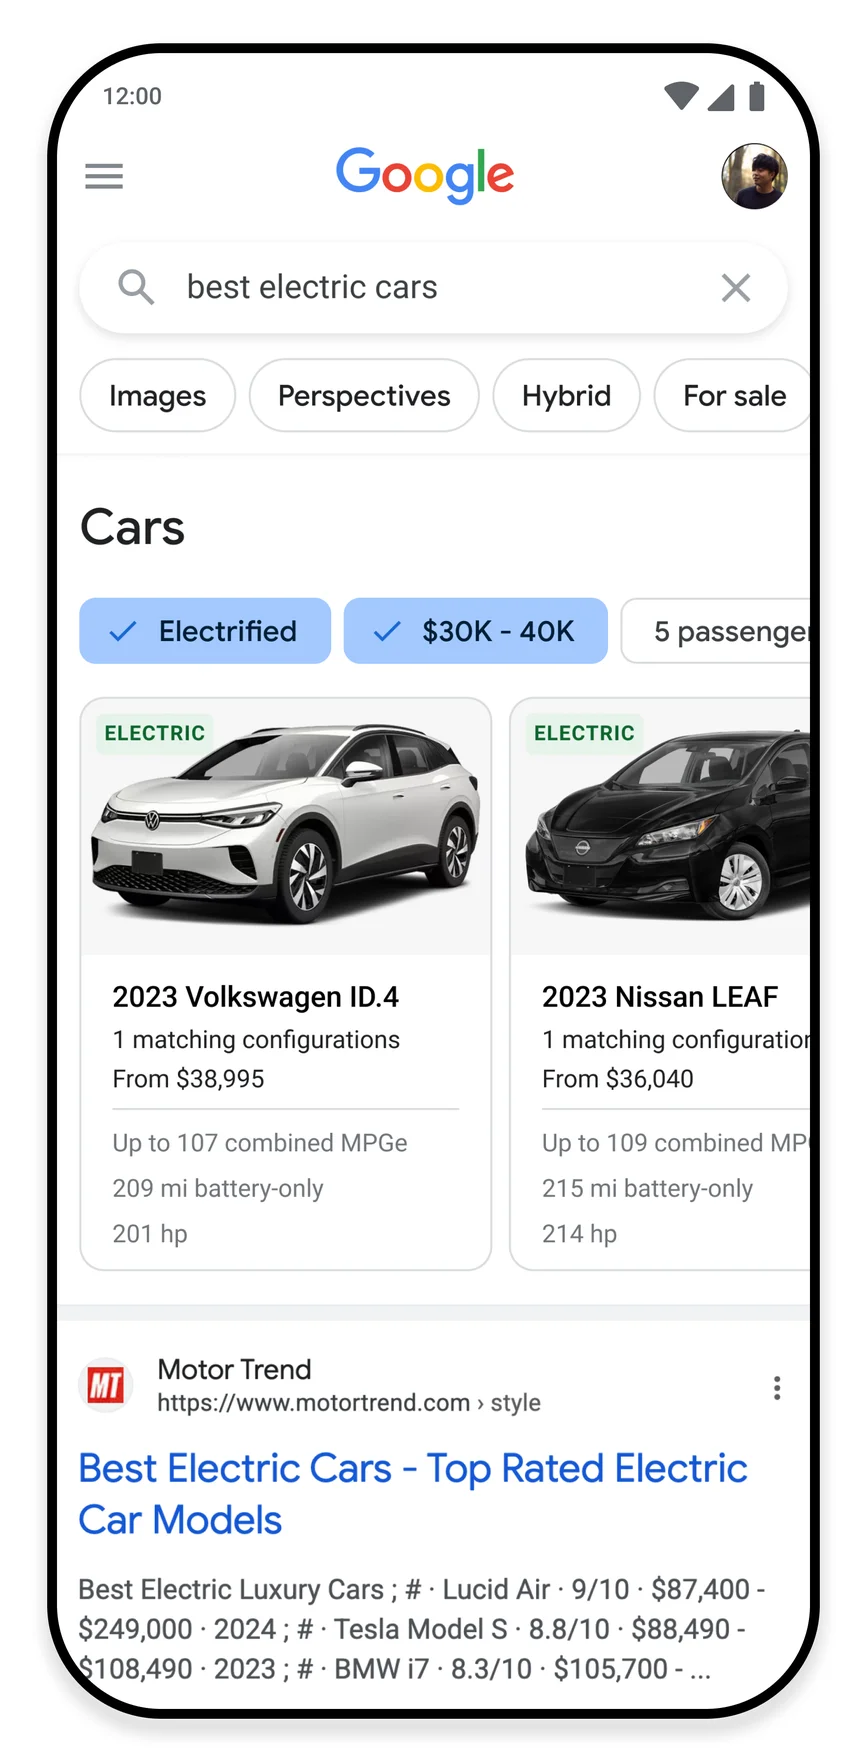 Images show a price comparison between two EVs and information about government incentives triggered by a search for electric cars.